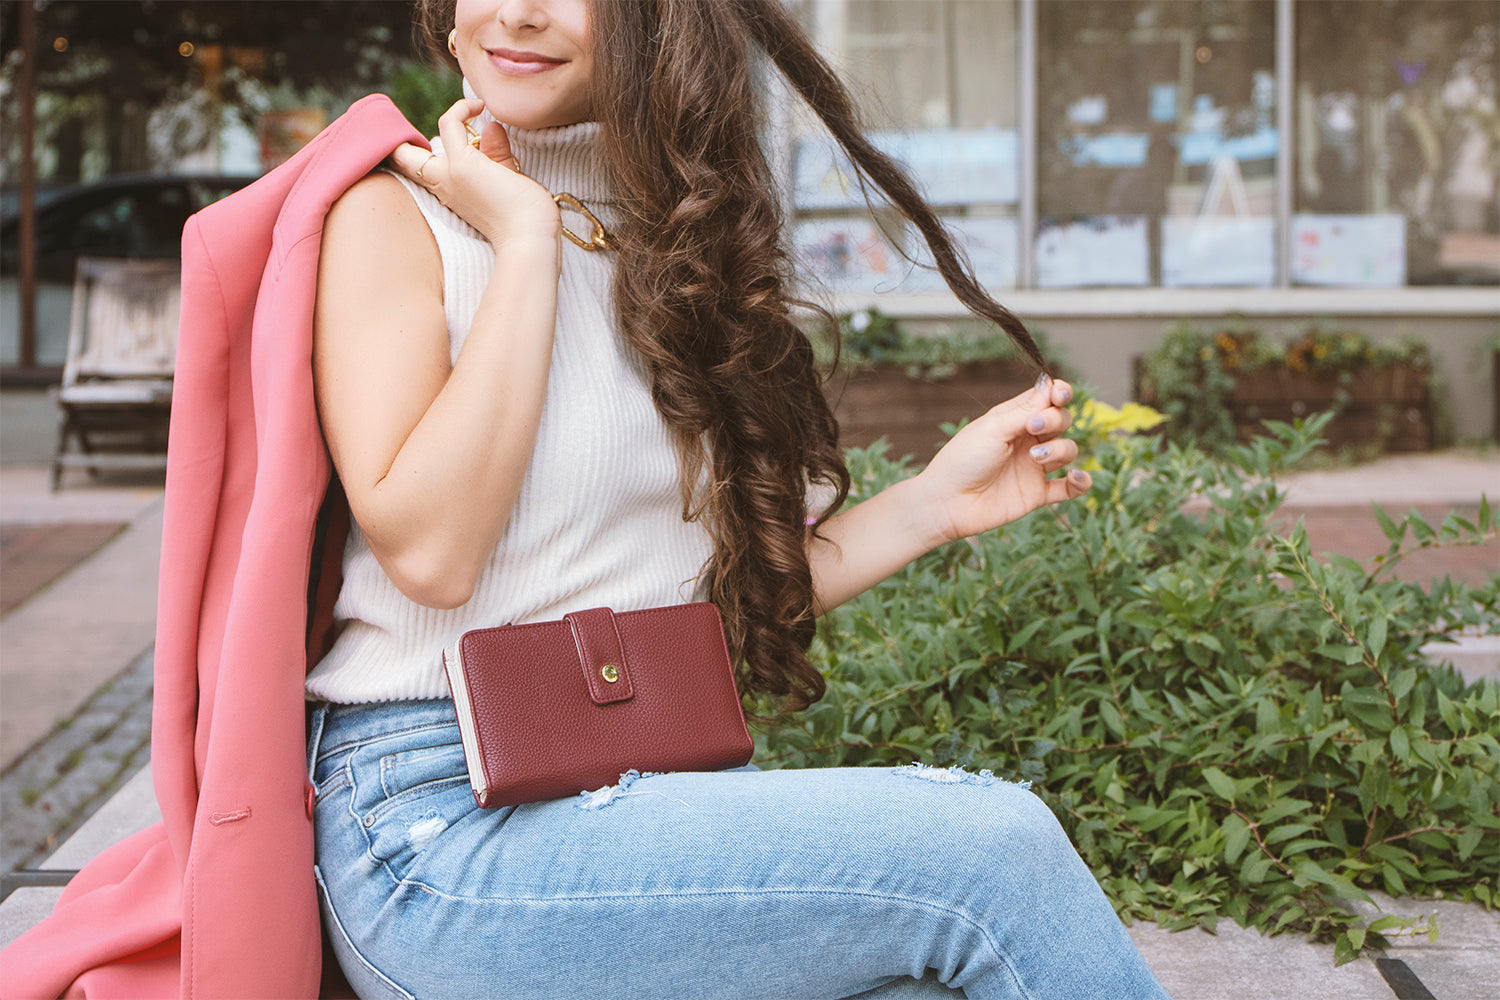 Protect Your Information This Holiday Season - A woman in a white top and jeans holds her pink blazer over her shoulder as she sits down on a stone wall. In her lap rests our Wine Madame Secretary Leather Clutch Wallet. 